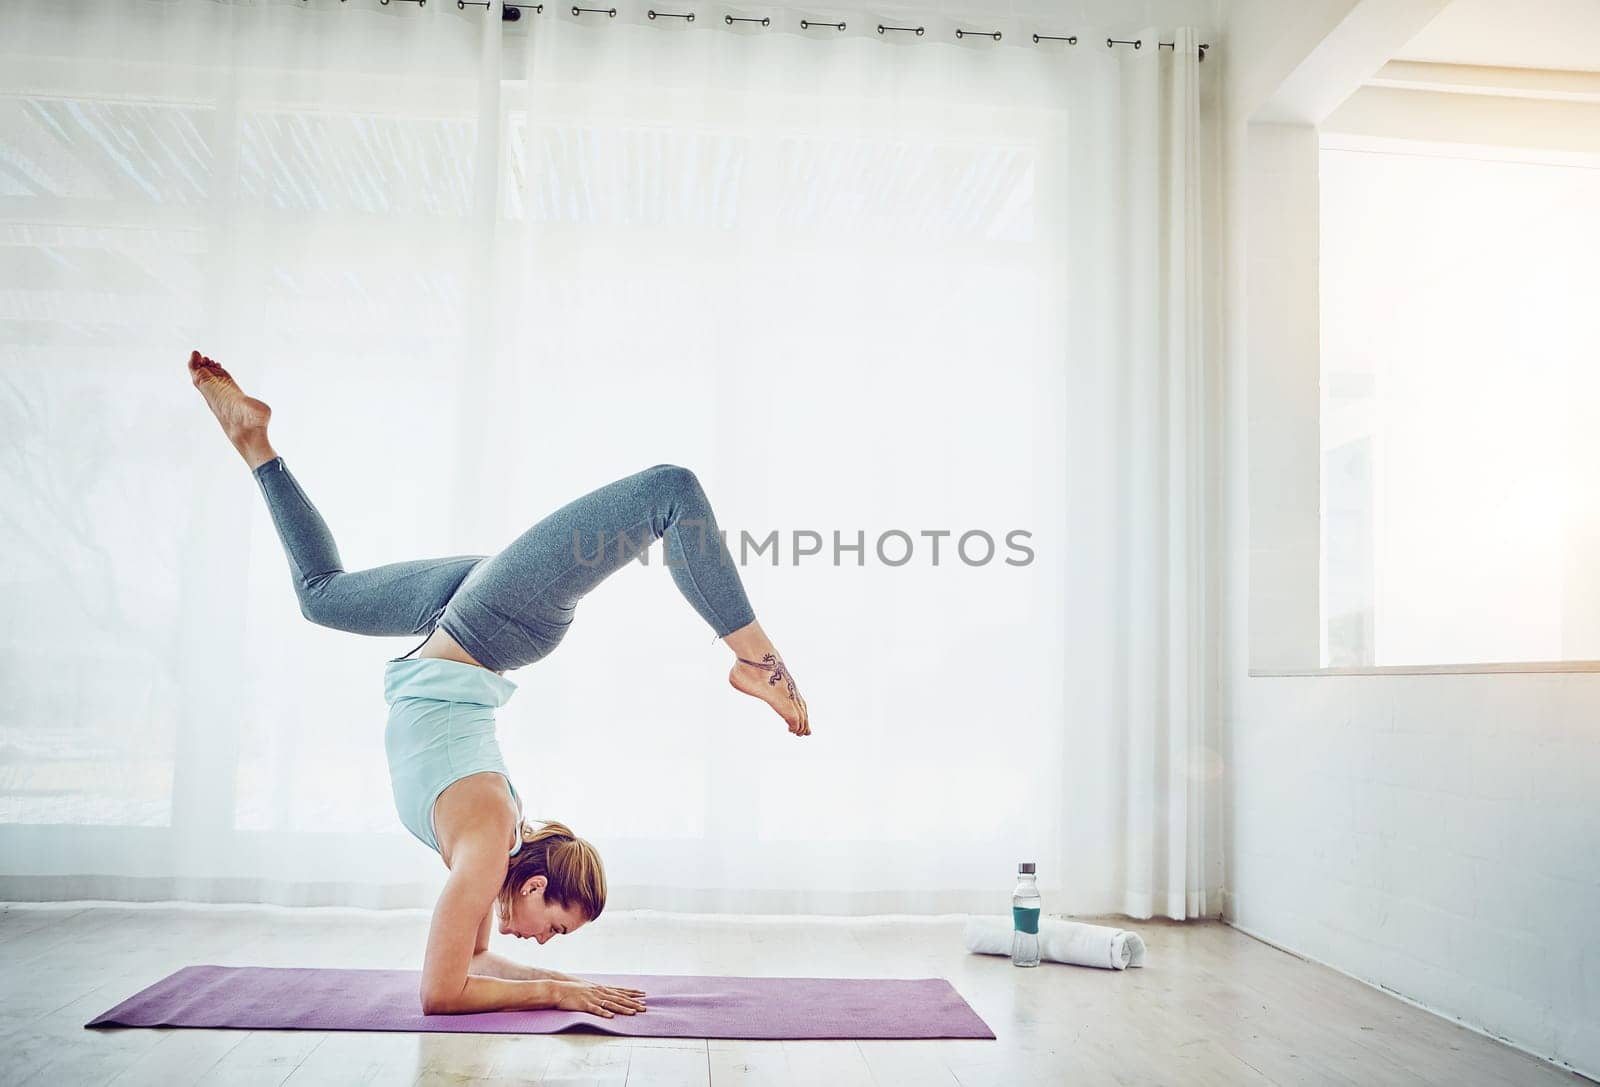 Yoga was made for me. an attractive woman practising her yoga routine at home